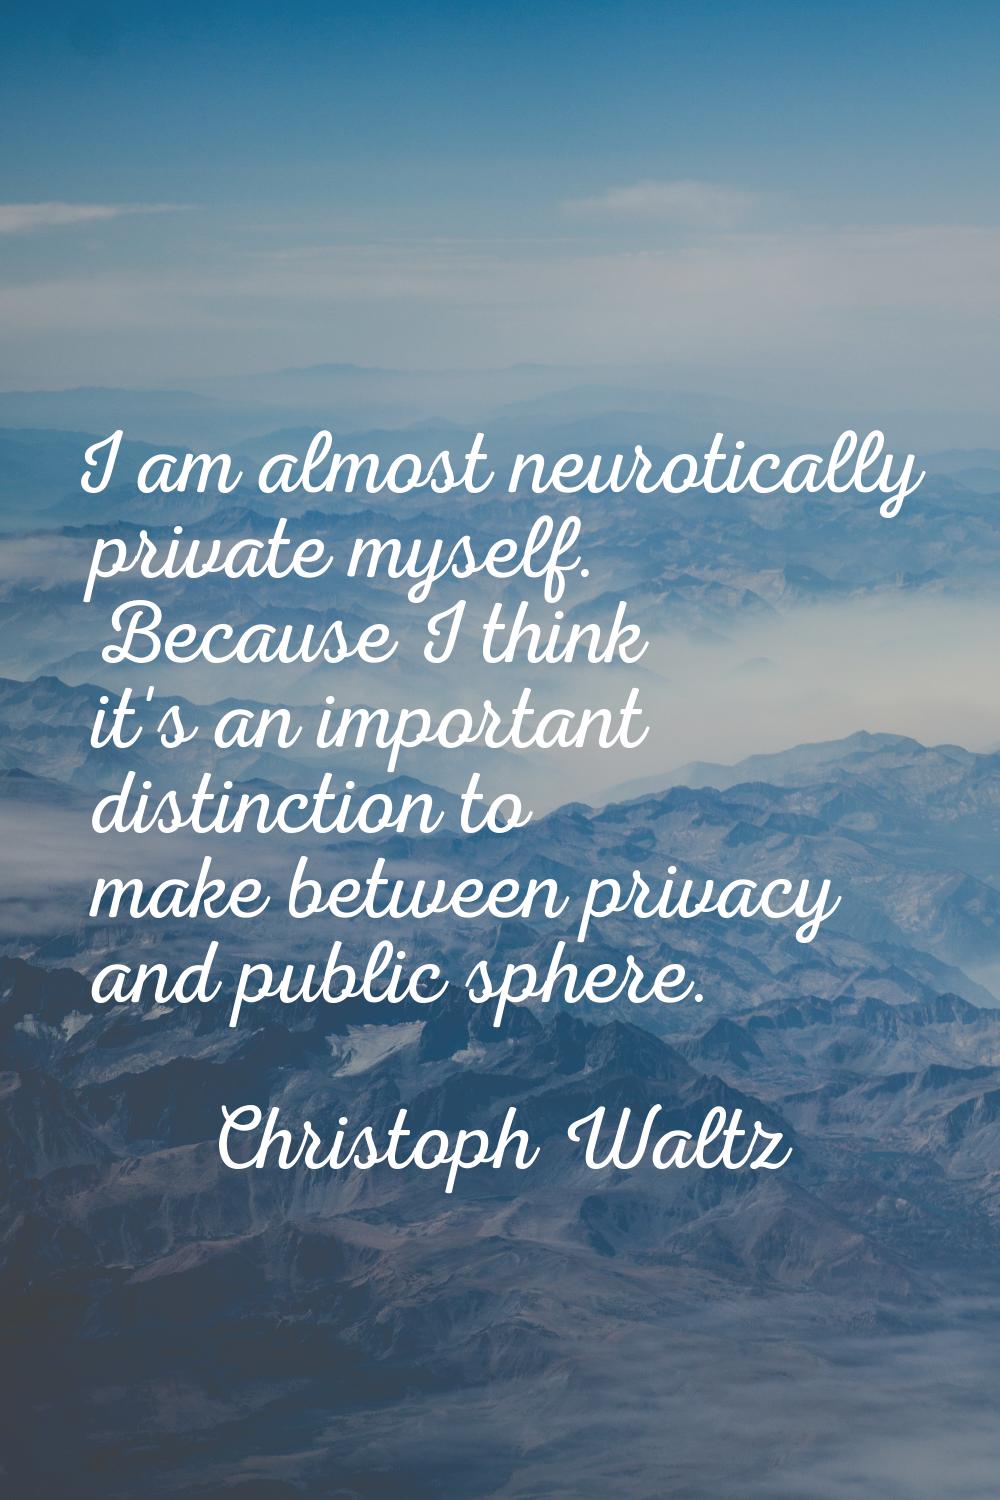 I am almost neurotically private myself. Because I think it's an important distinction to make betw